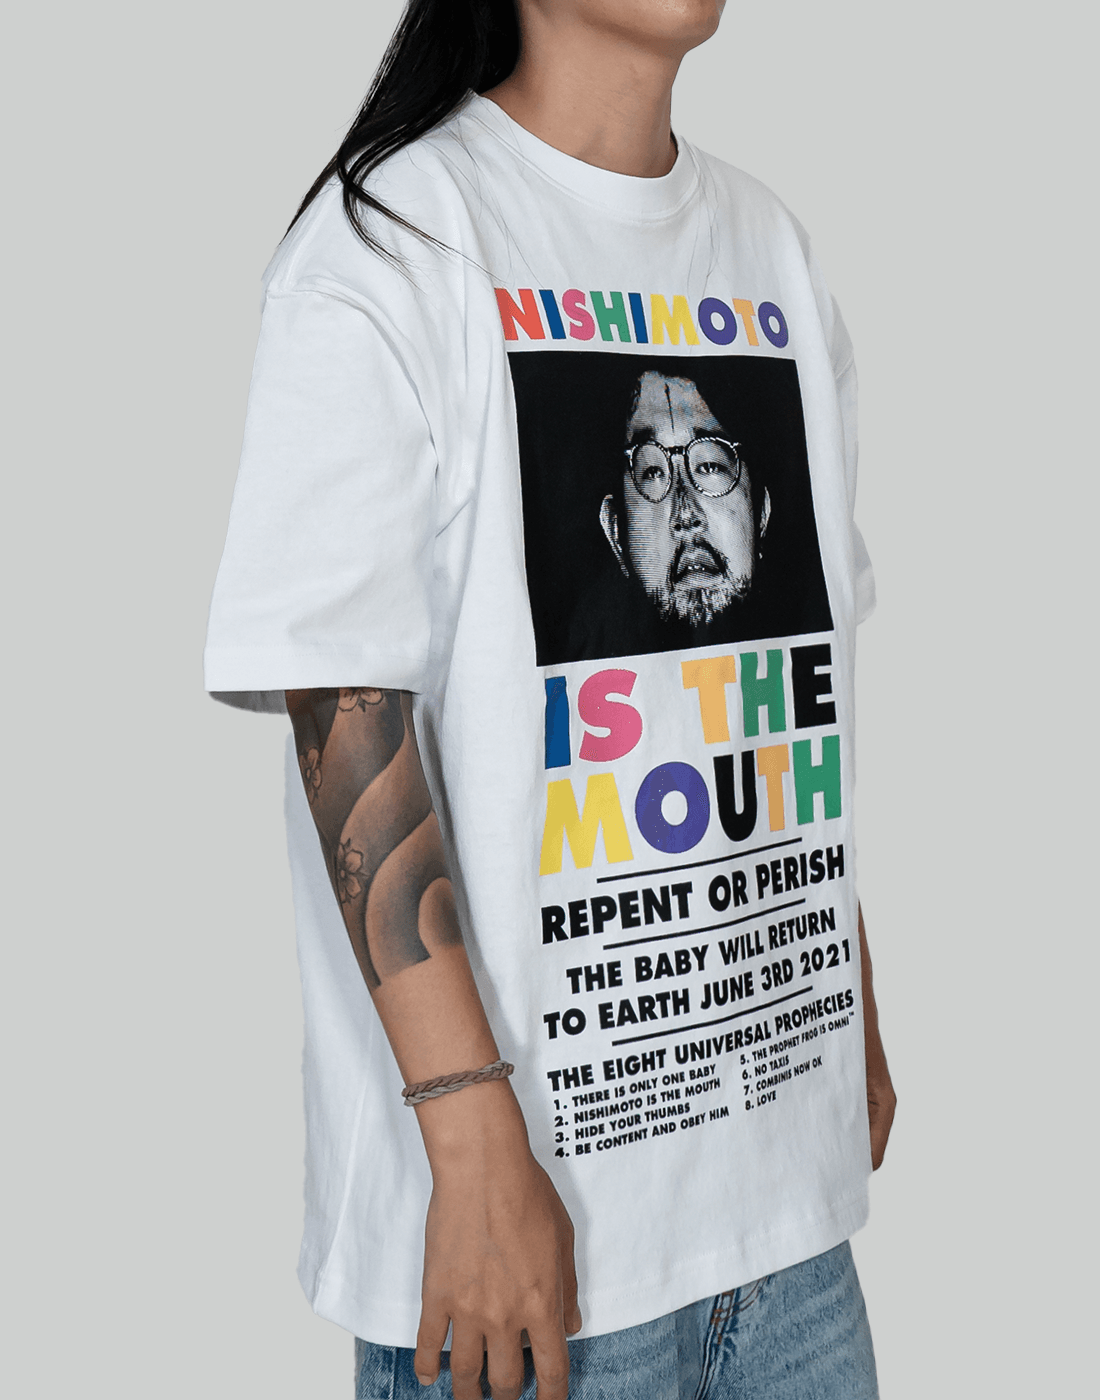 NISHIMOTO IS THE MOUTH CLASSIC TEE (GLITTER) - 082plus